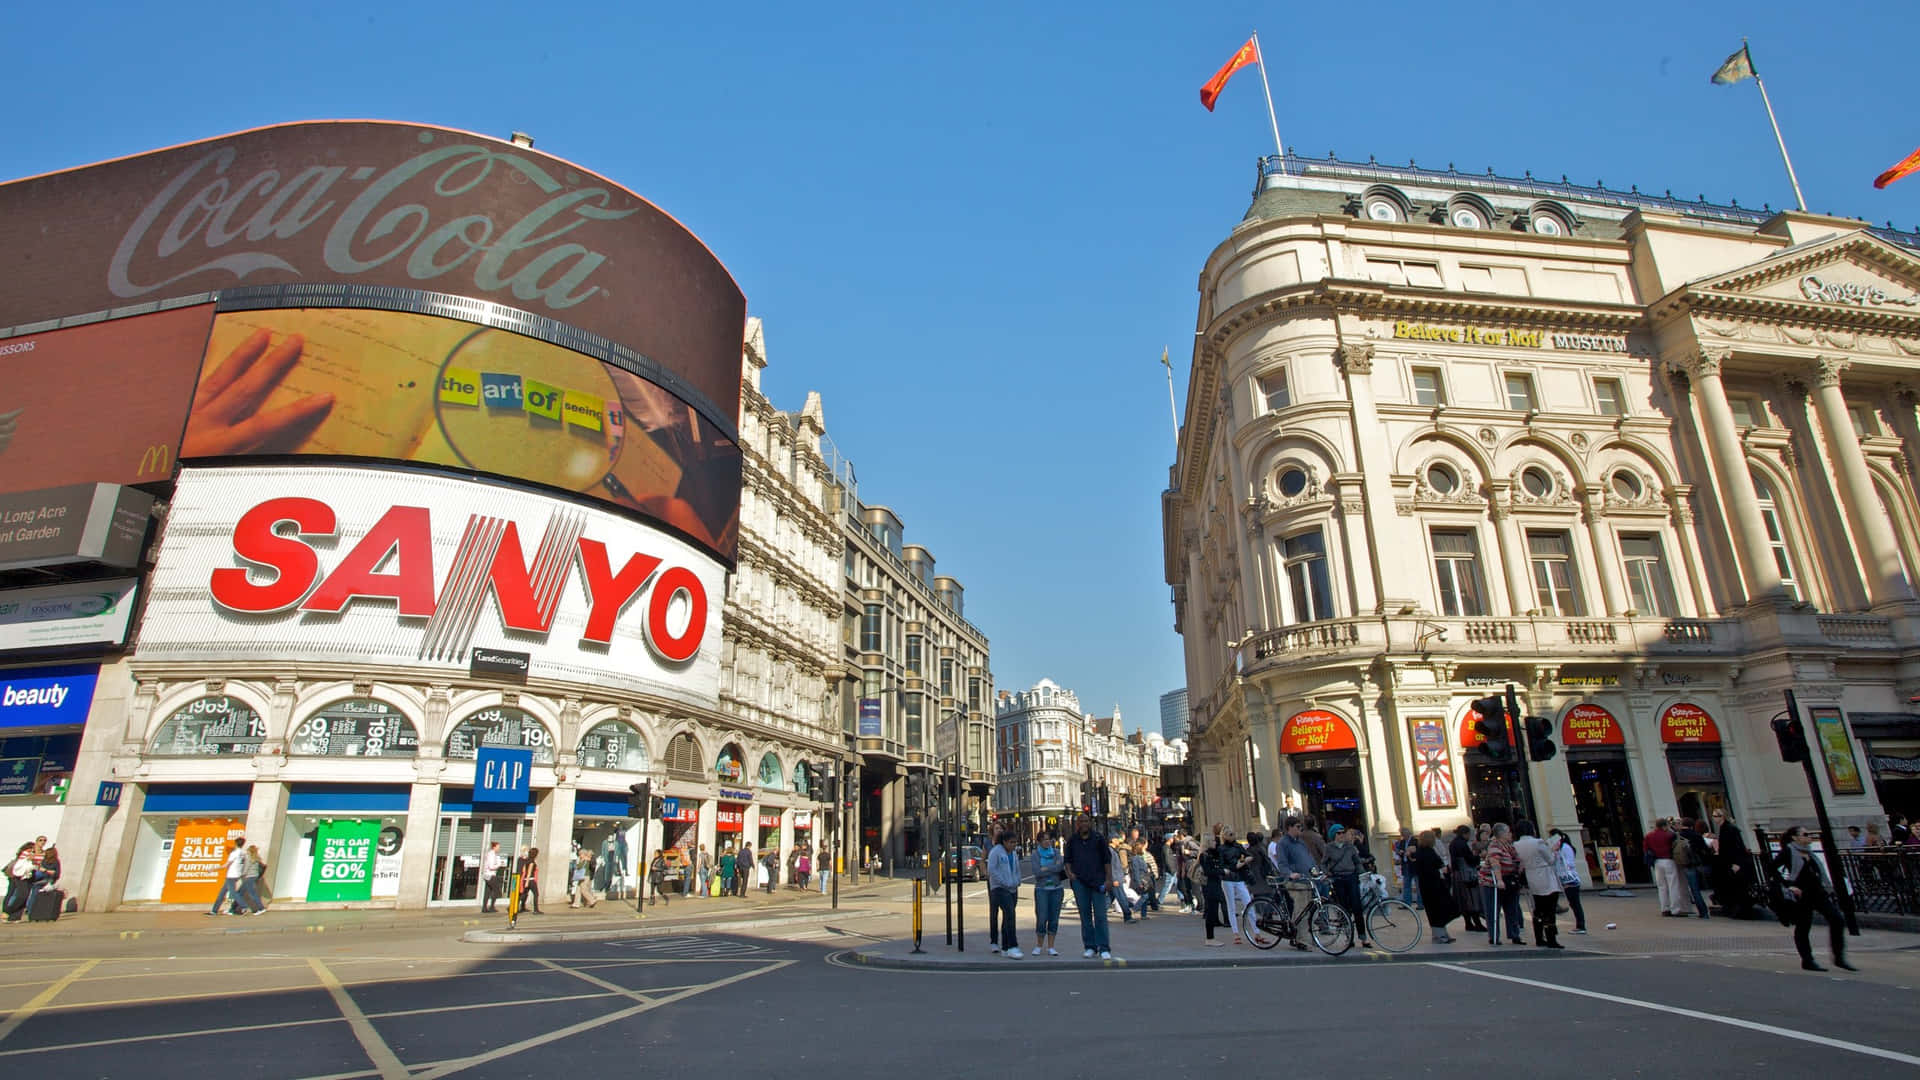 Belebtestraße In Piccadilly Circus. Wallpaper